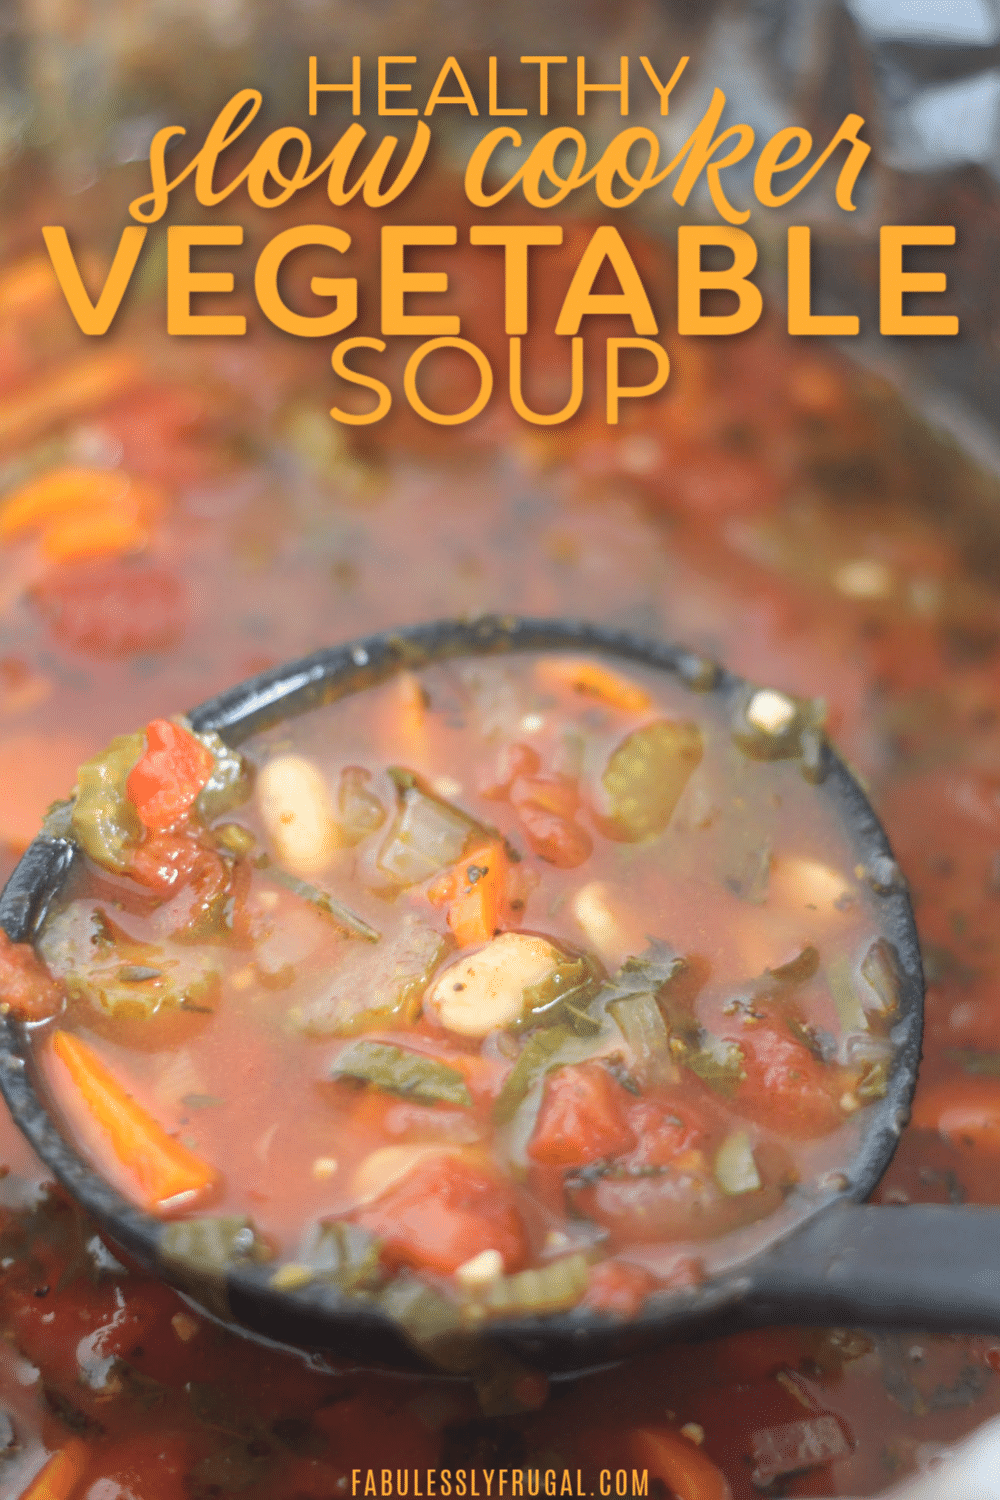 How to make vegetable soup in a crockpot